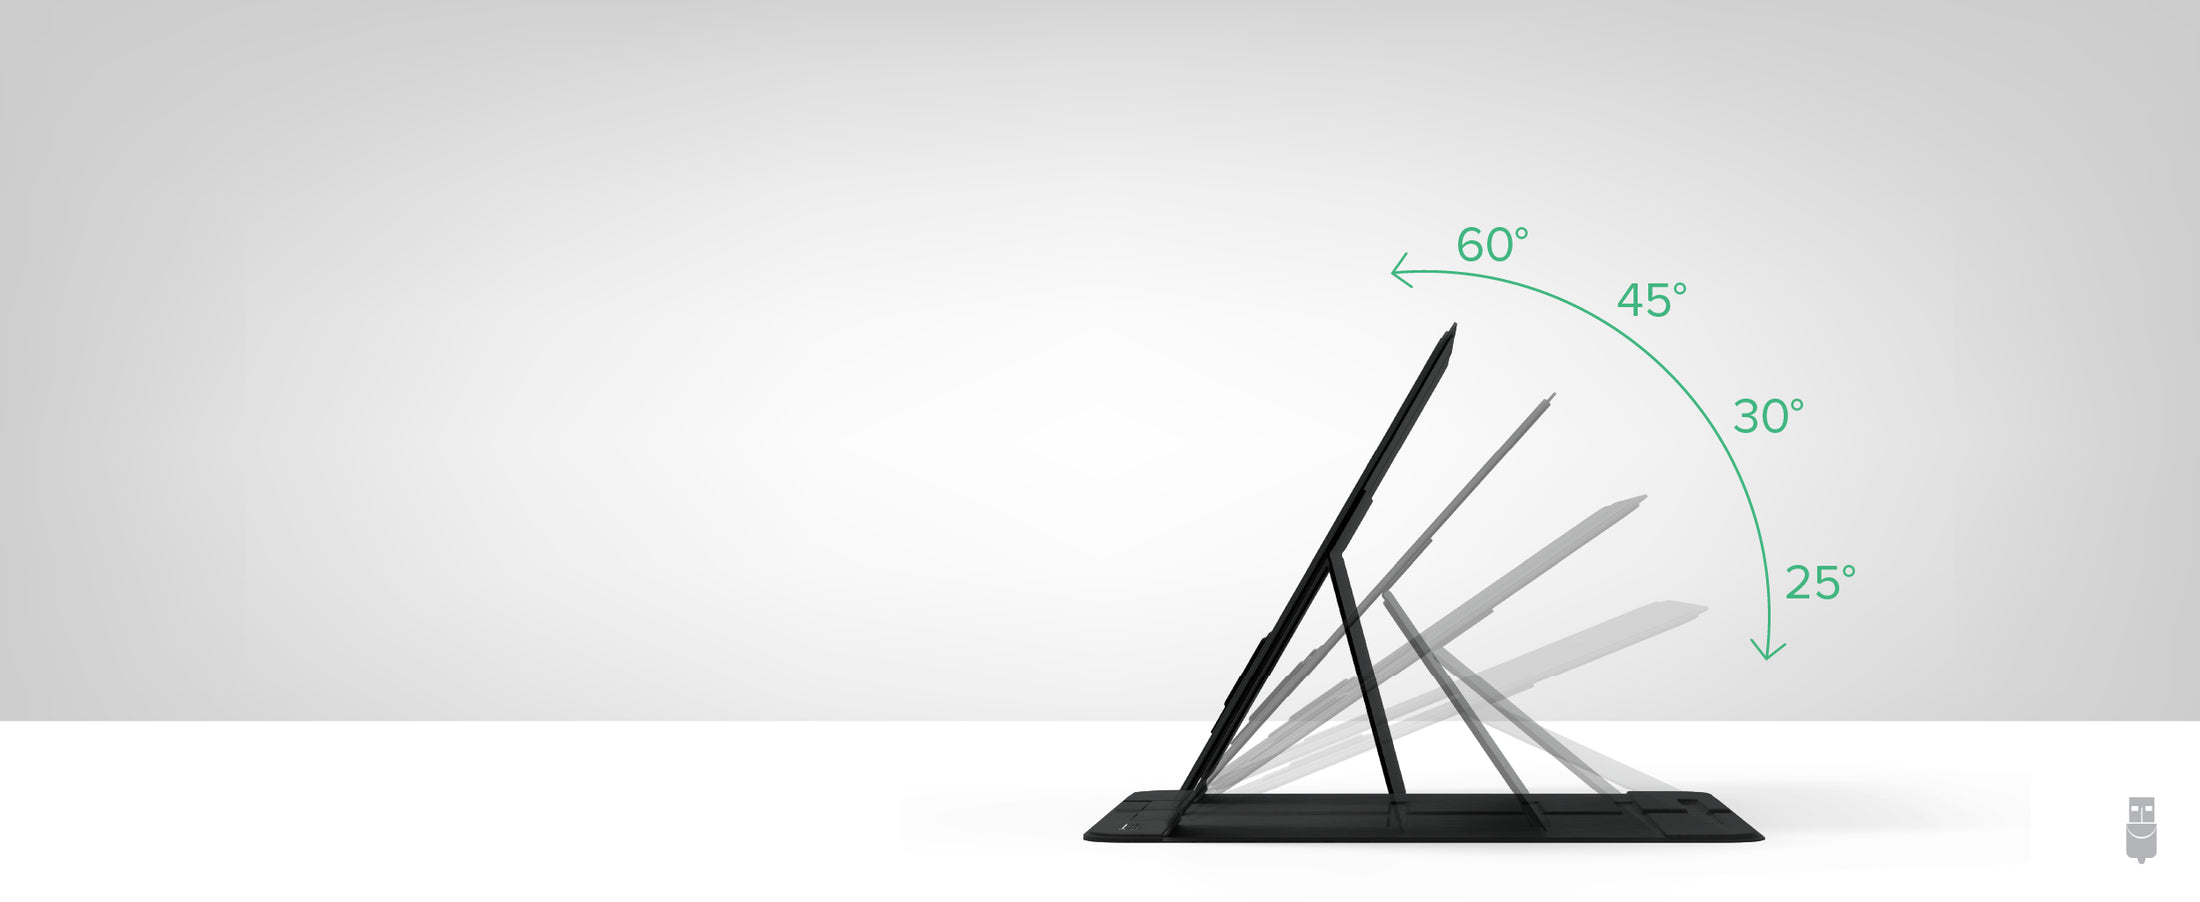 Image showing the various viewing angles of the PT-STANDX